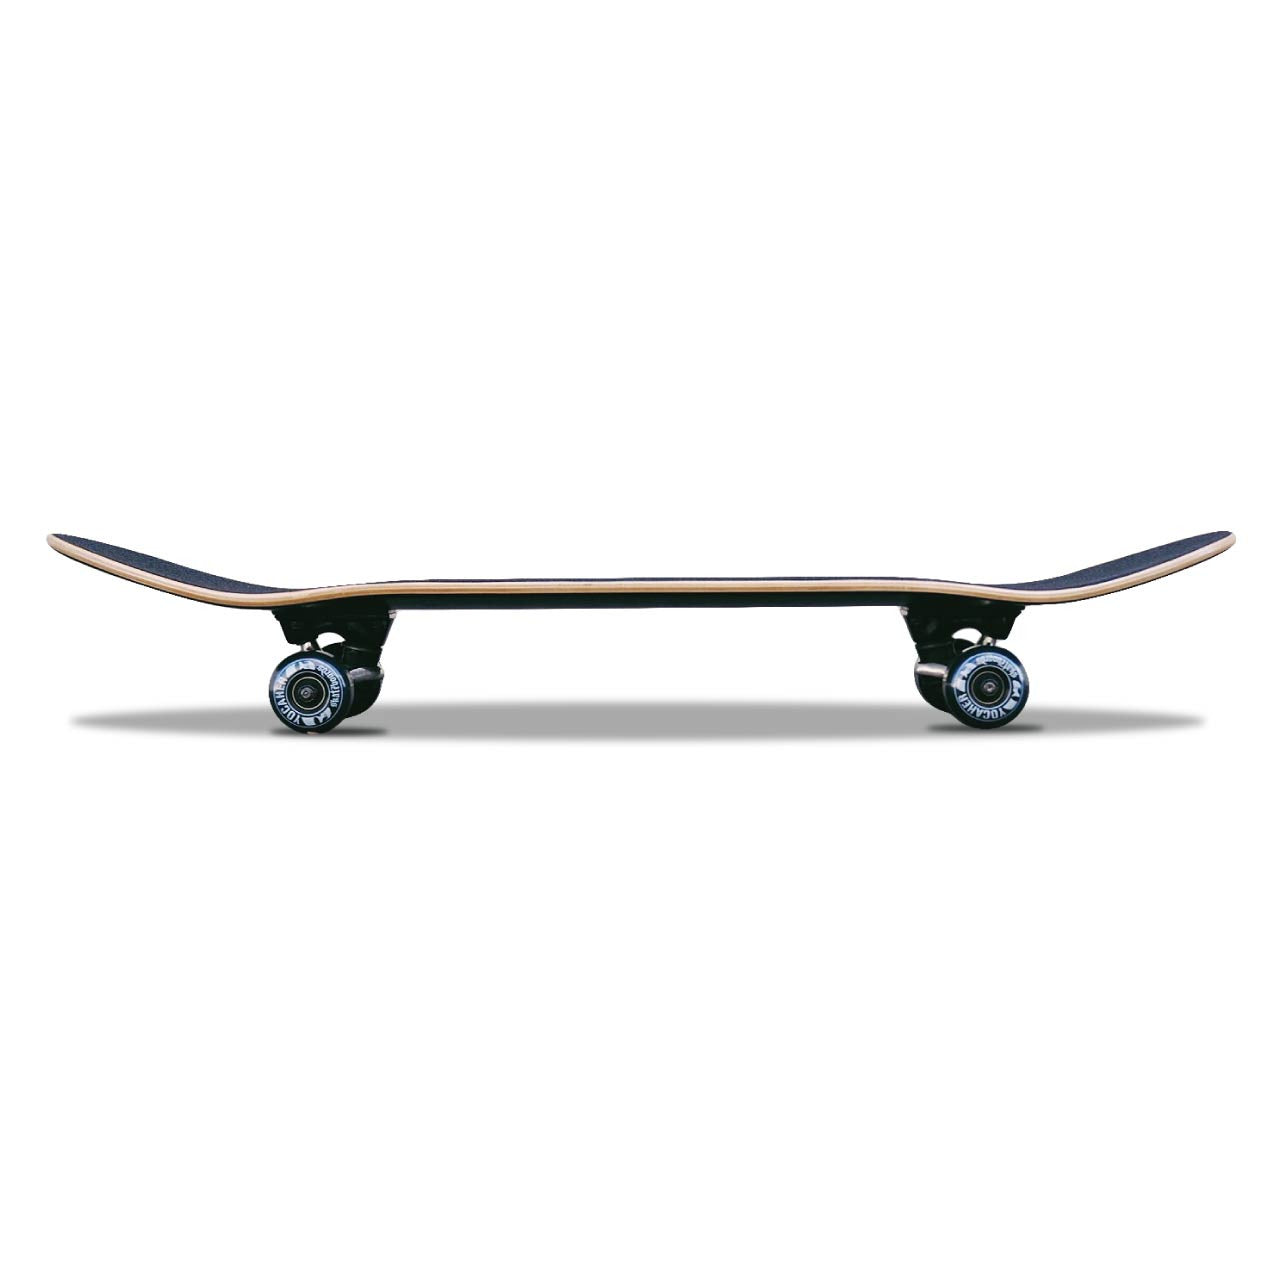 Yocaher Complete Blank Skateboard 7.75" - Natural